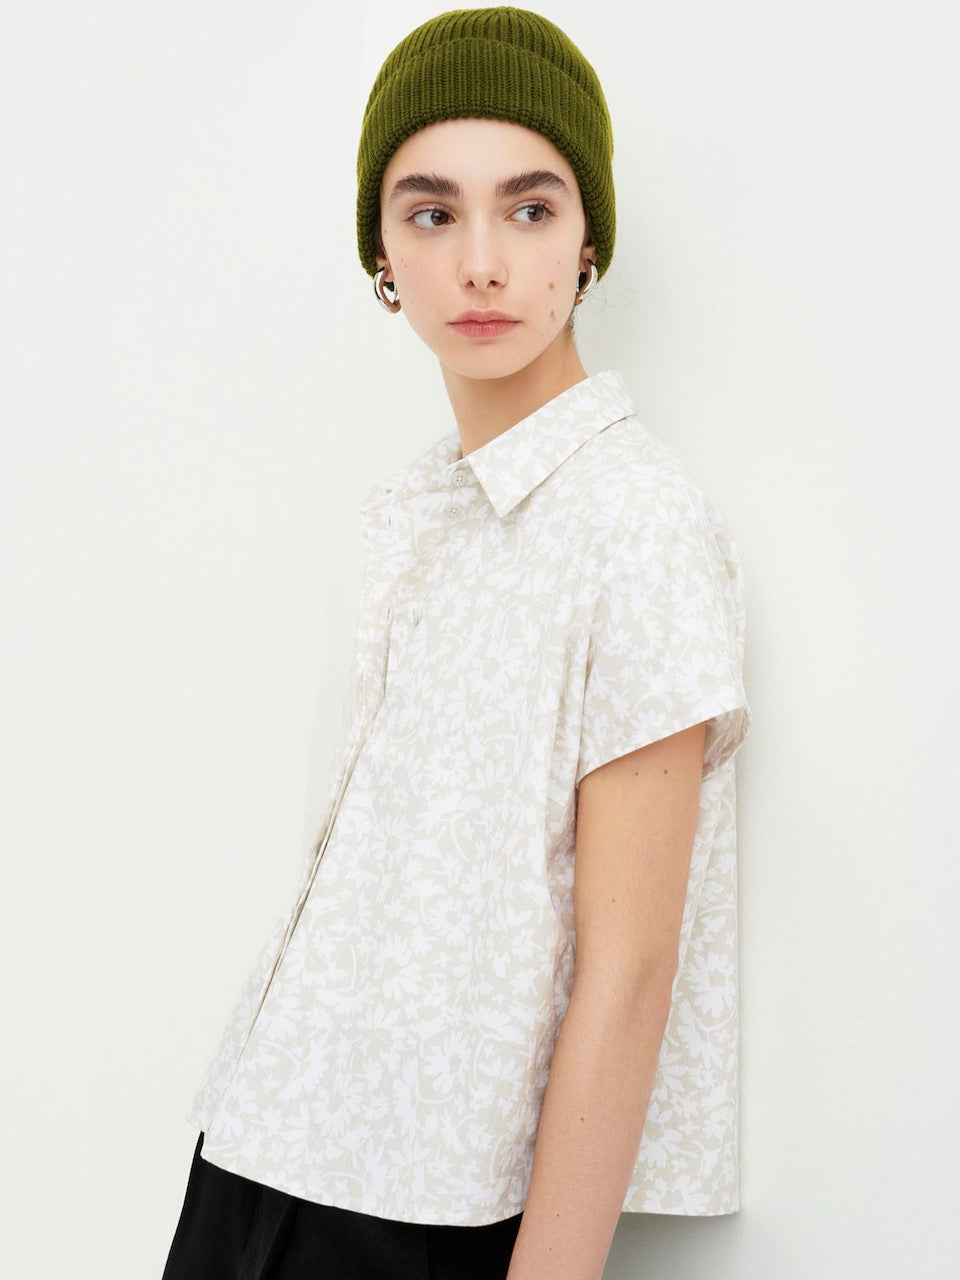 The model is wearing a Studio Shirt - Flora Print by Kowtow with a green beanie.